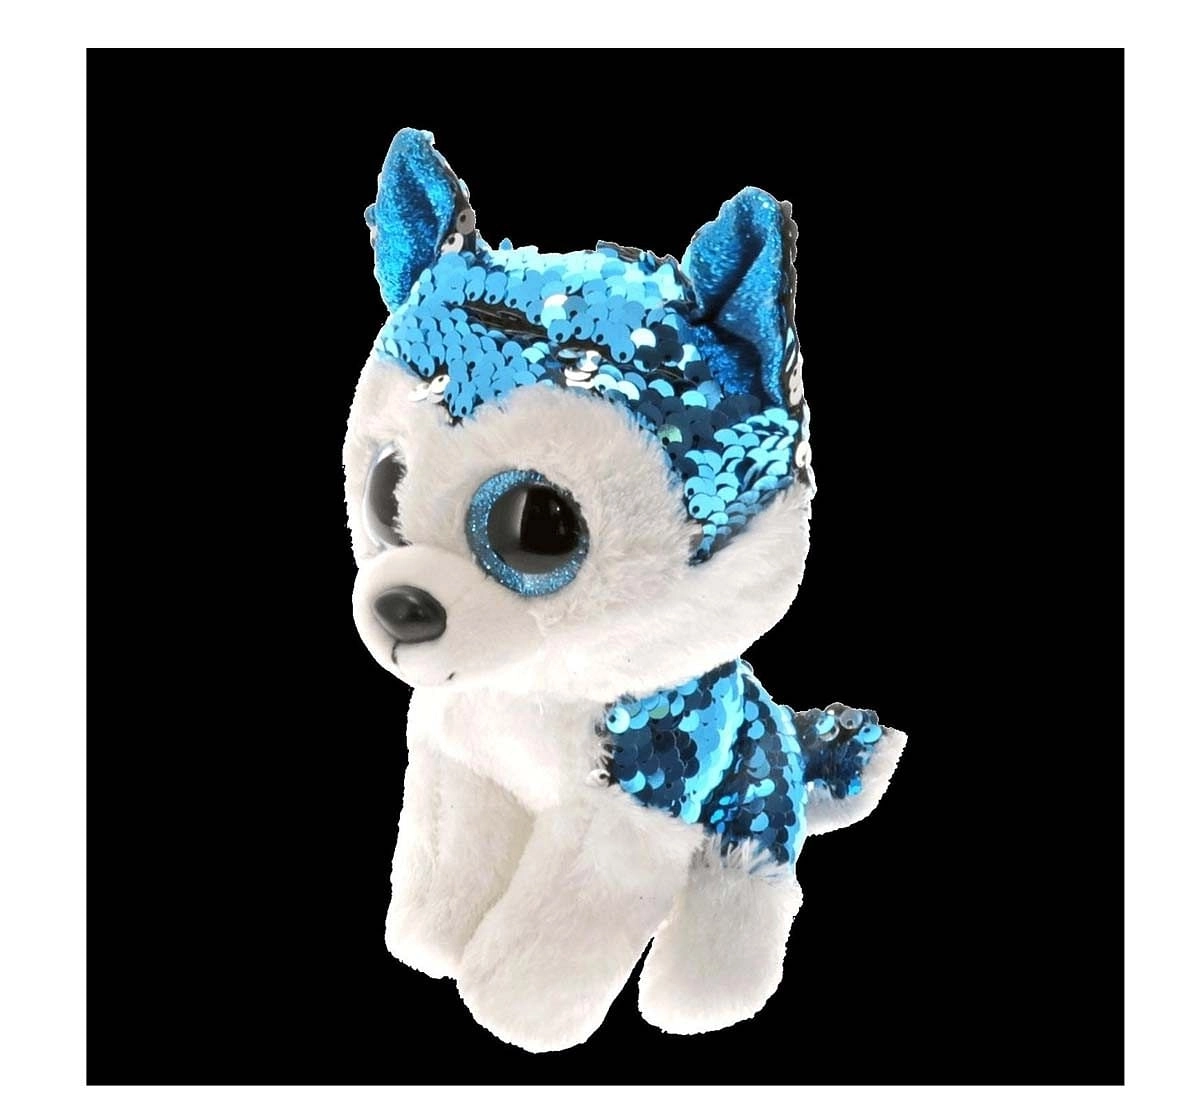 Ty Toys Slush - Husky Fllippables Regular Beanie Boo Quirky Soft Toys for Kids Age 3Y+ - 15 Cm